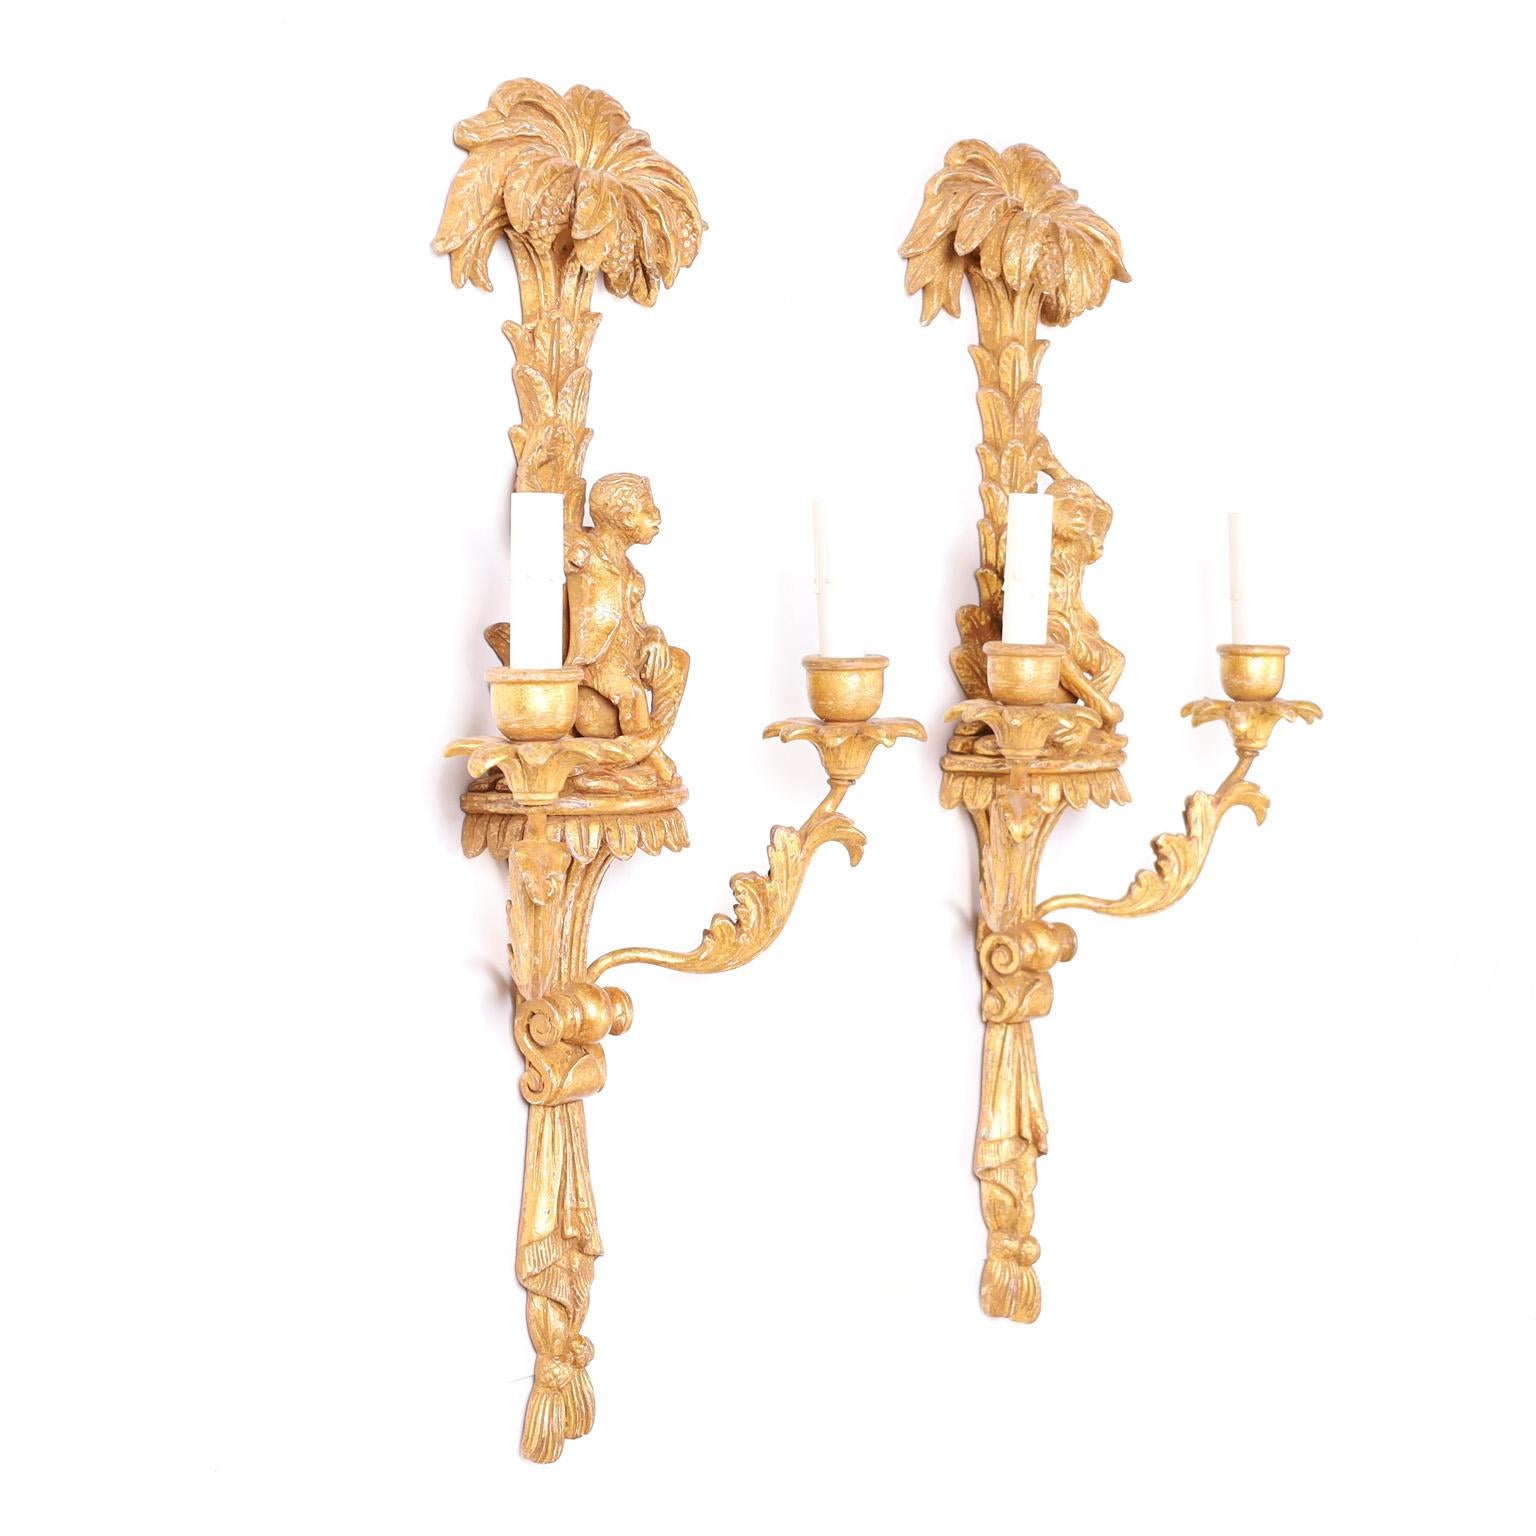 True pair of classical antique Italian two light wall sconces gessoed and gilt having well dressed monkeys sitting under palm trees on pedestals over candle cup arms with acanthus leaves and drapes and tassels at the bottom.